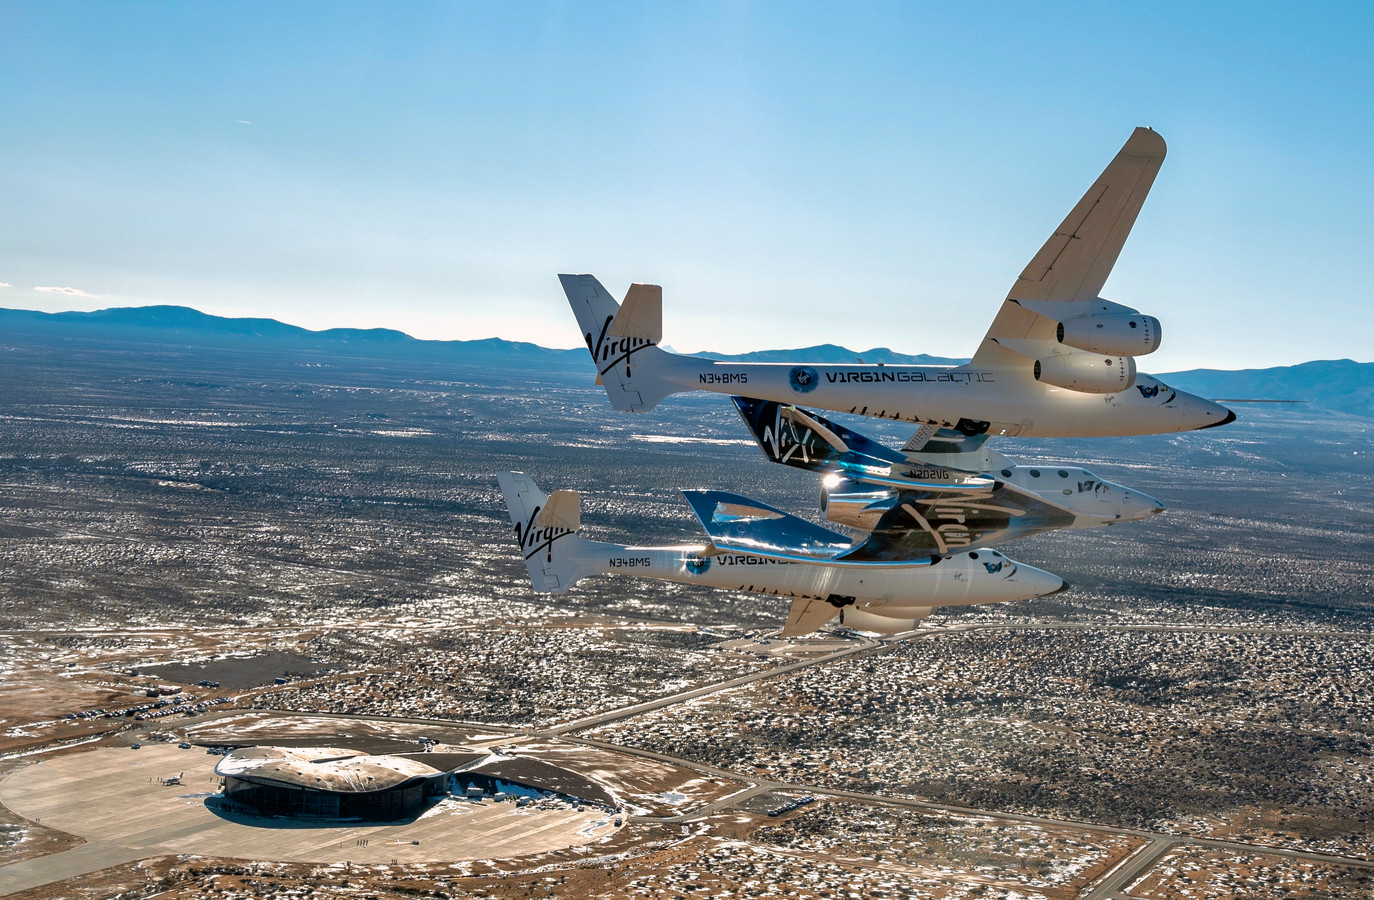 Virgin Galactic's VSS Unity vliegt over Spaceport America in Truth of Consequences in New Mexico.